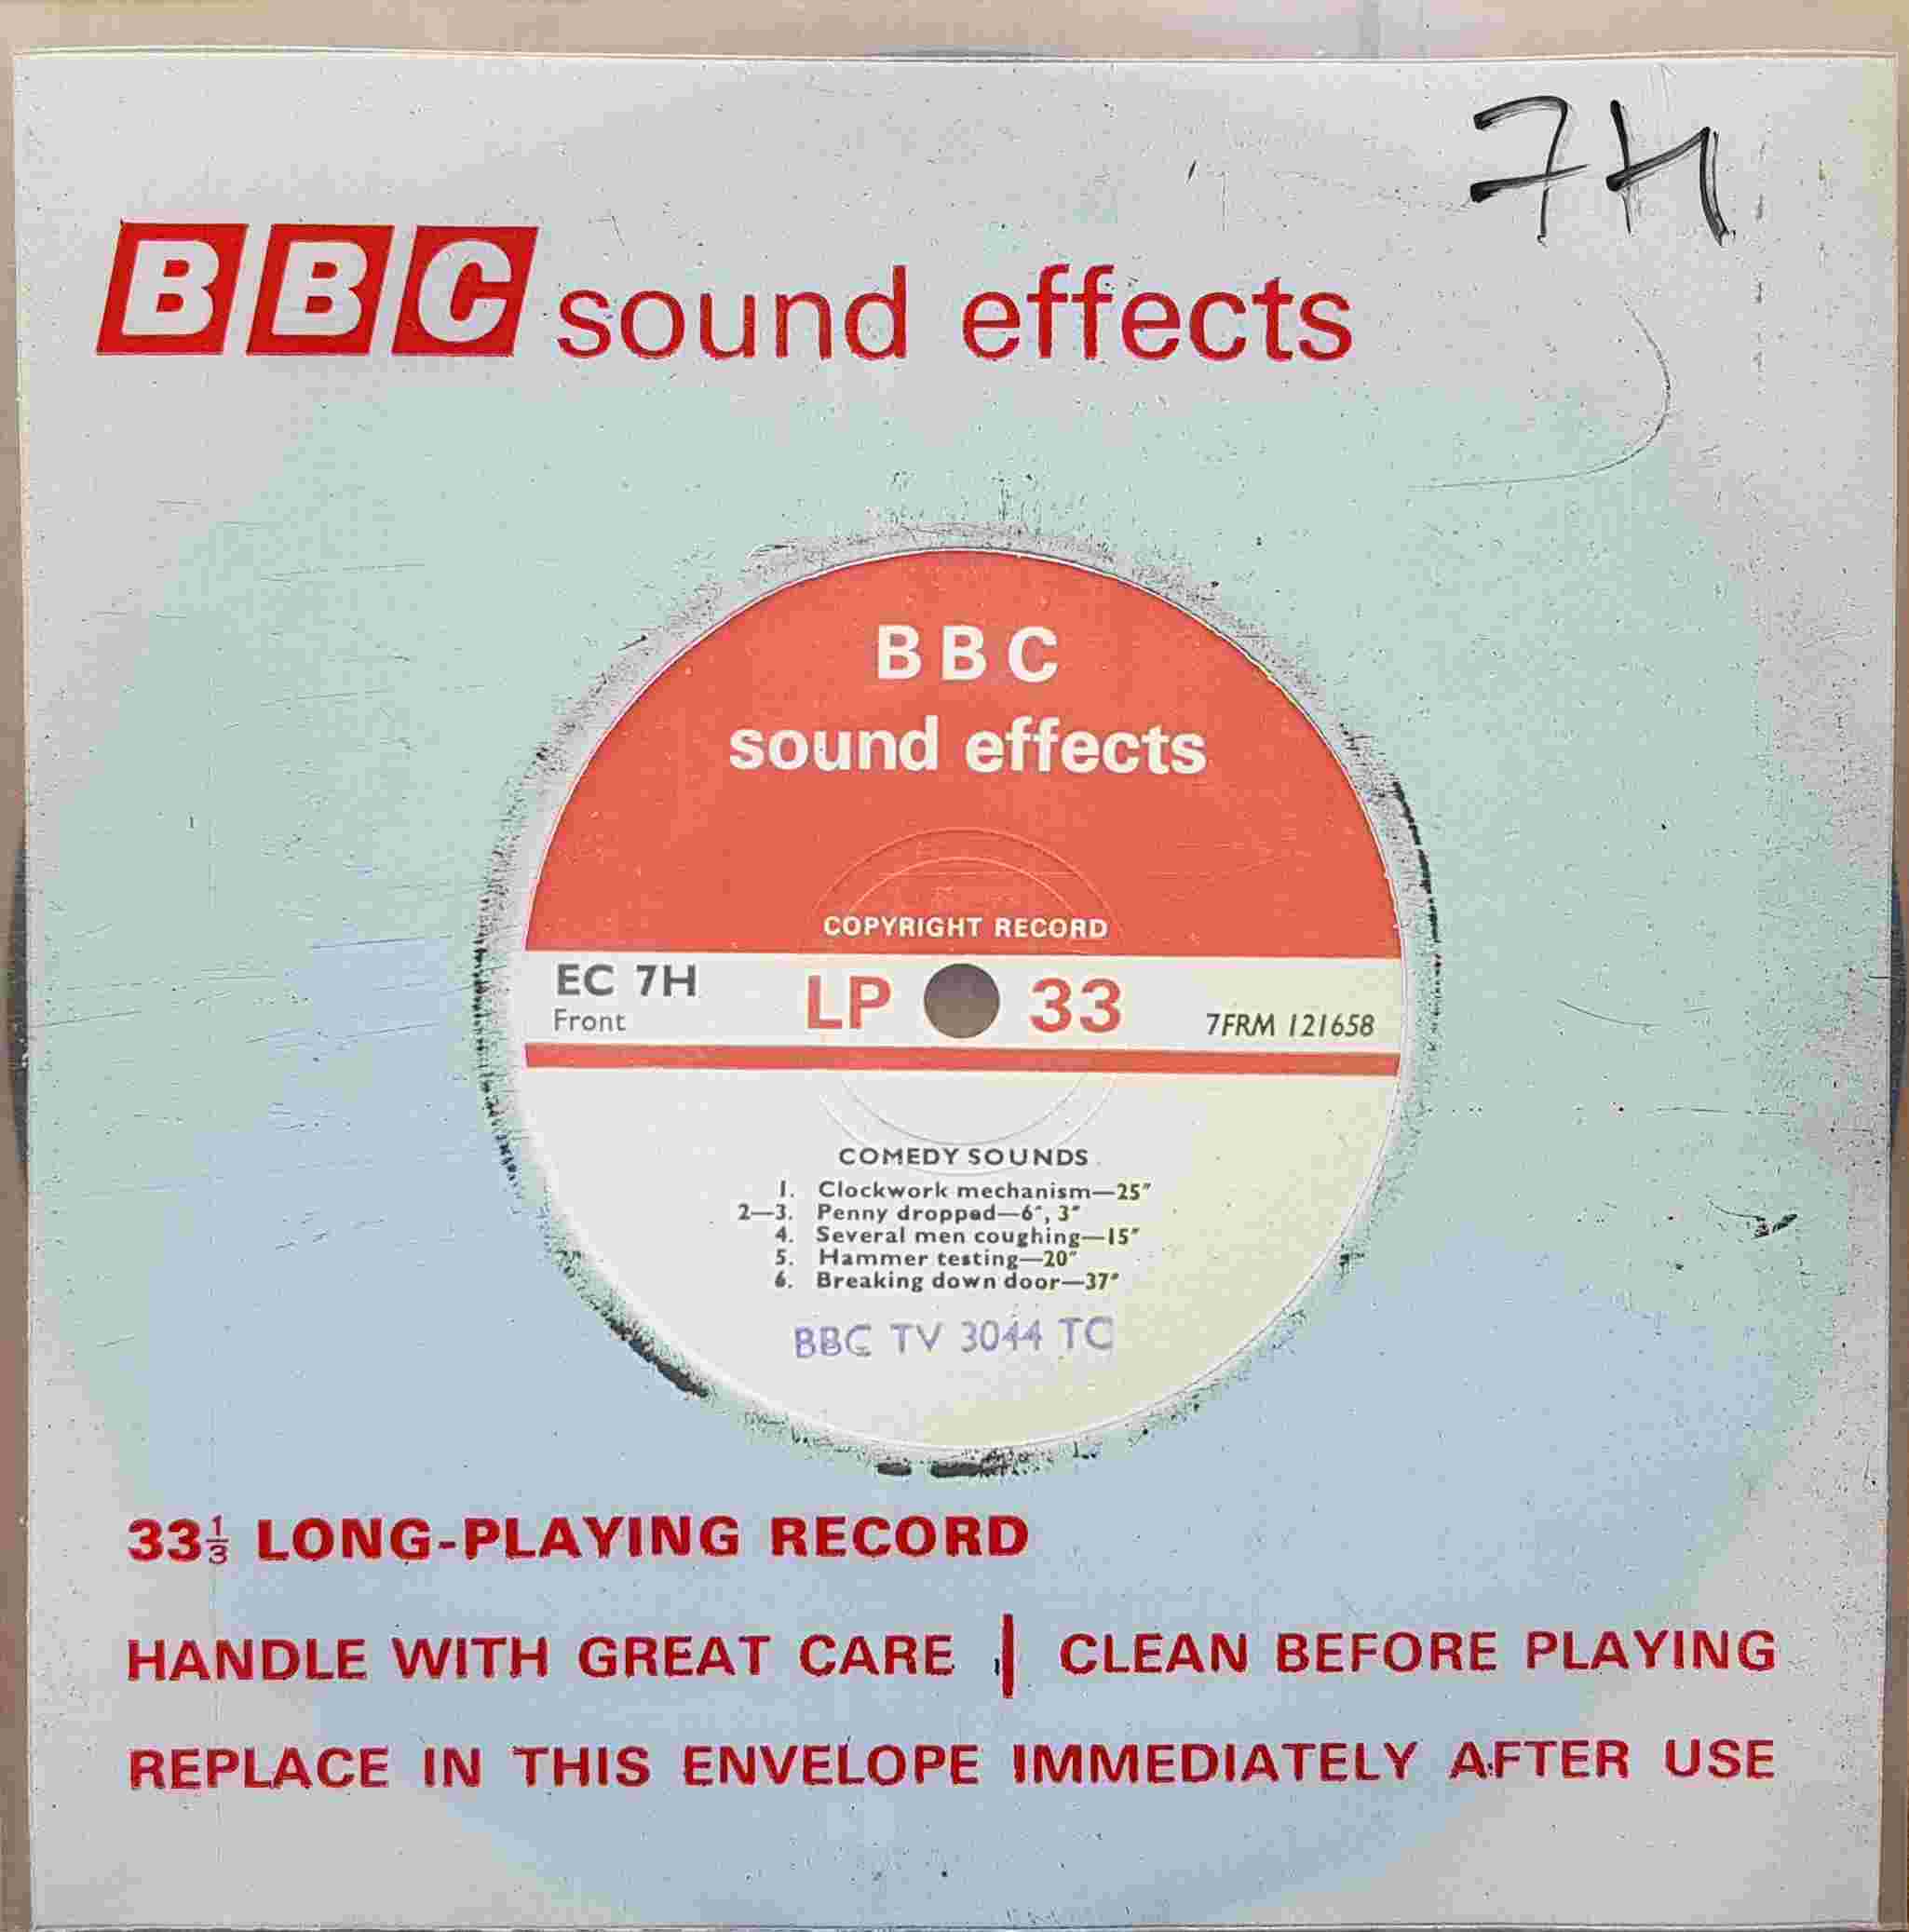 Picture of EC 7H Comedy sounds by artist Not registered from the BBC records and Tapes library